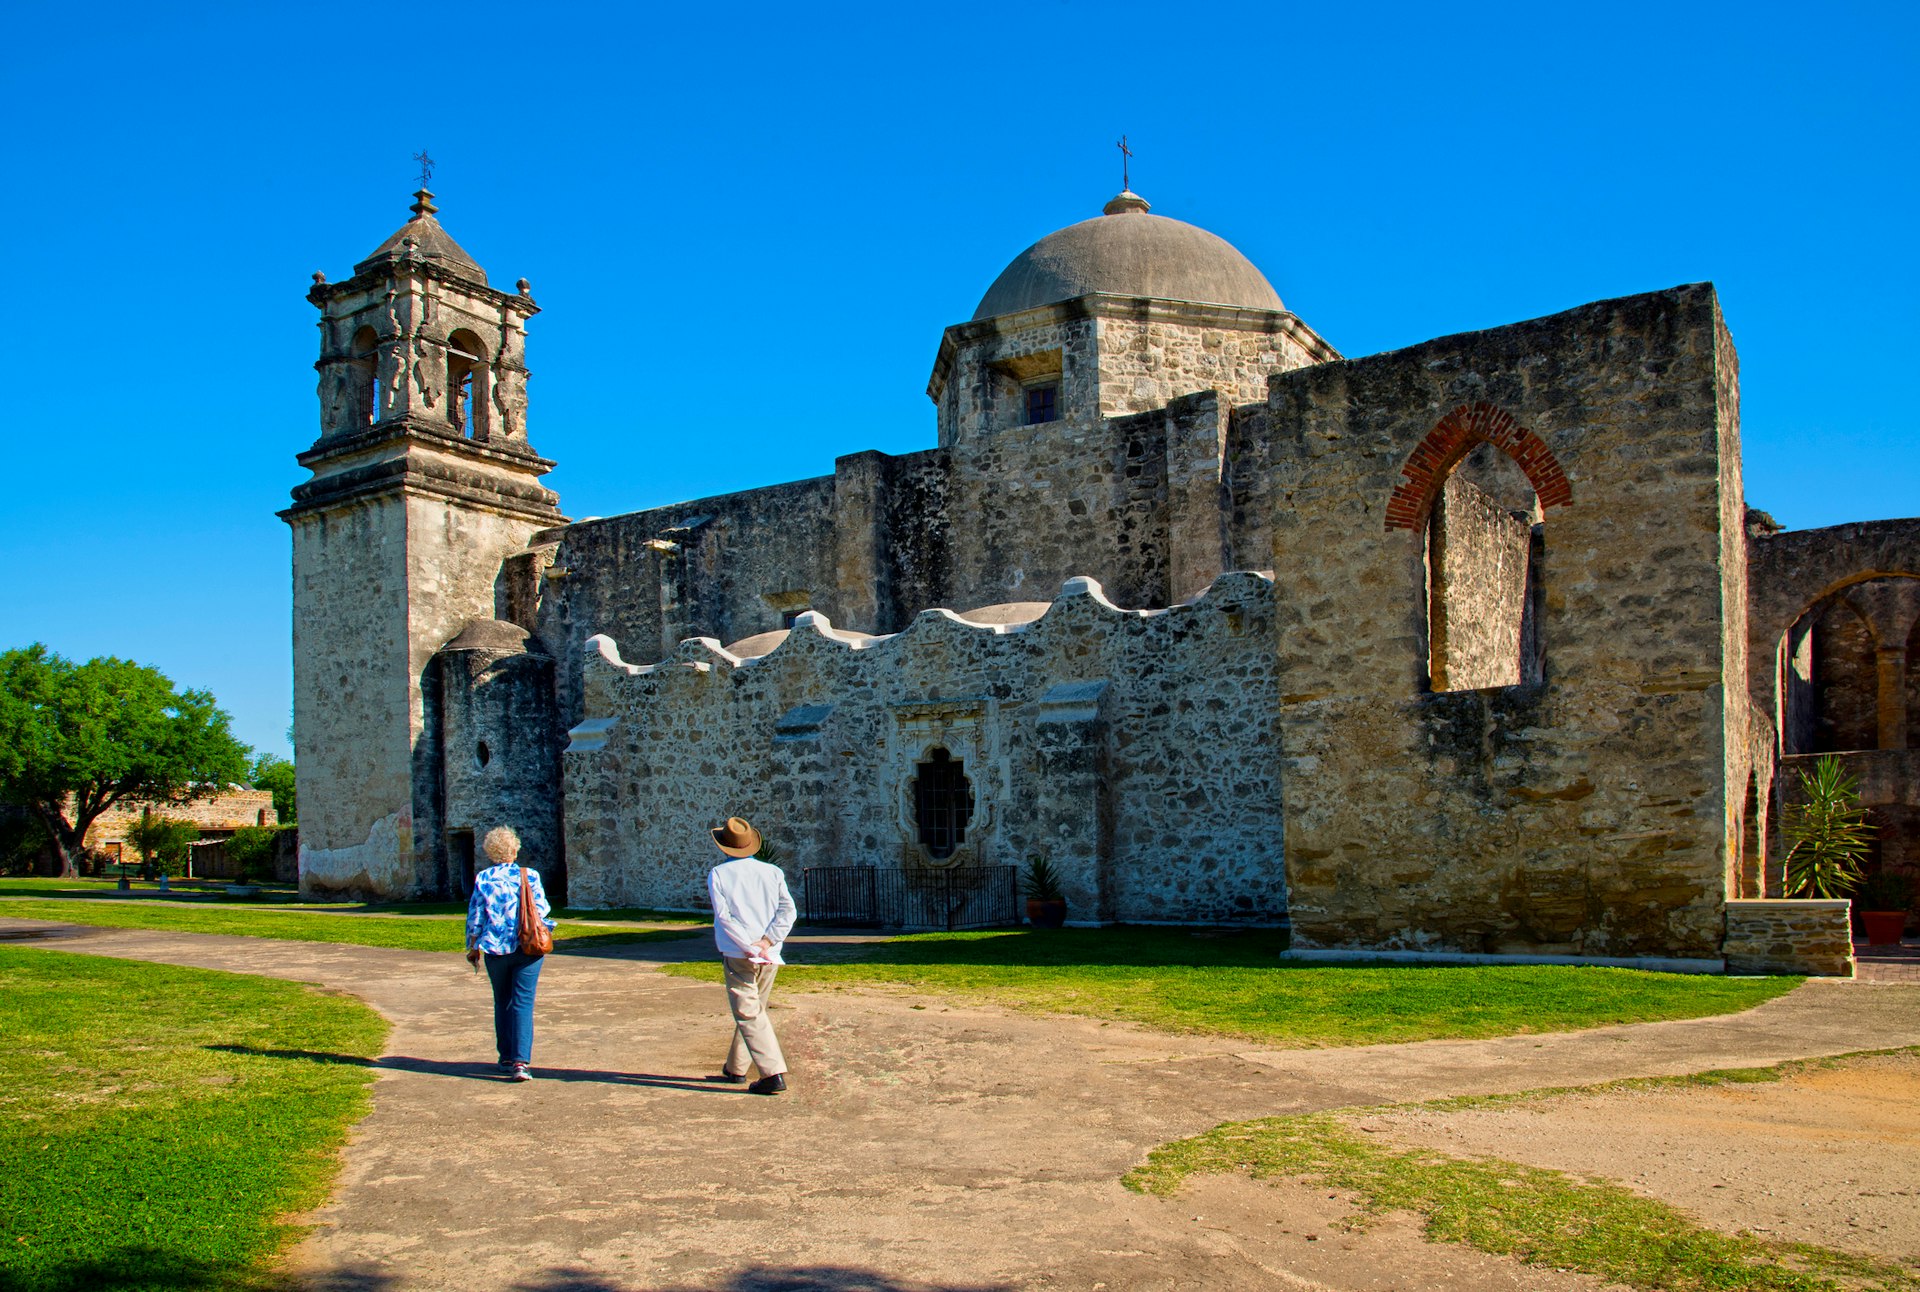 Two people walk in the grounds of a historic Mission building